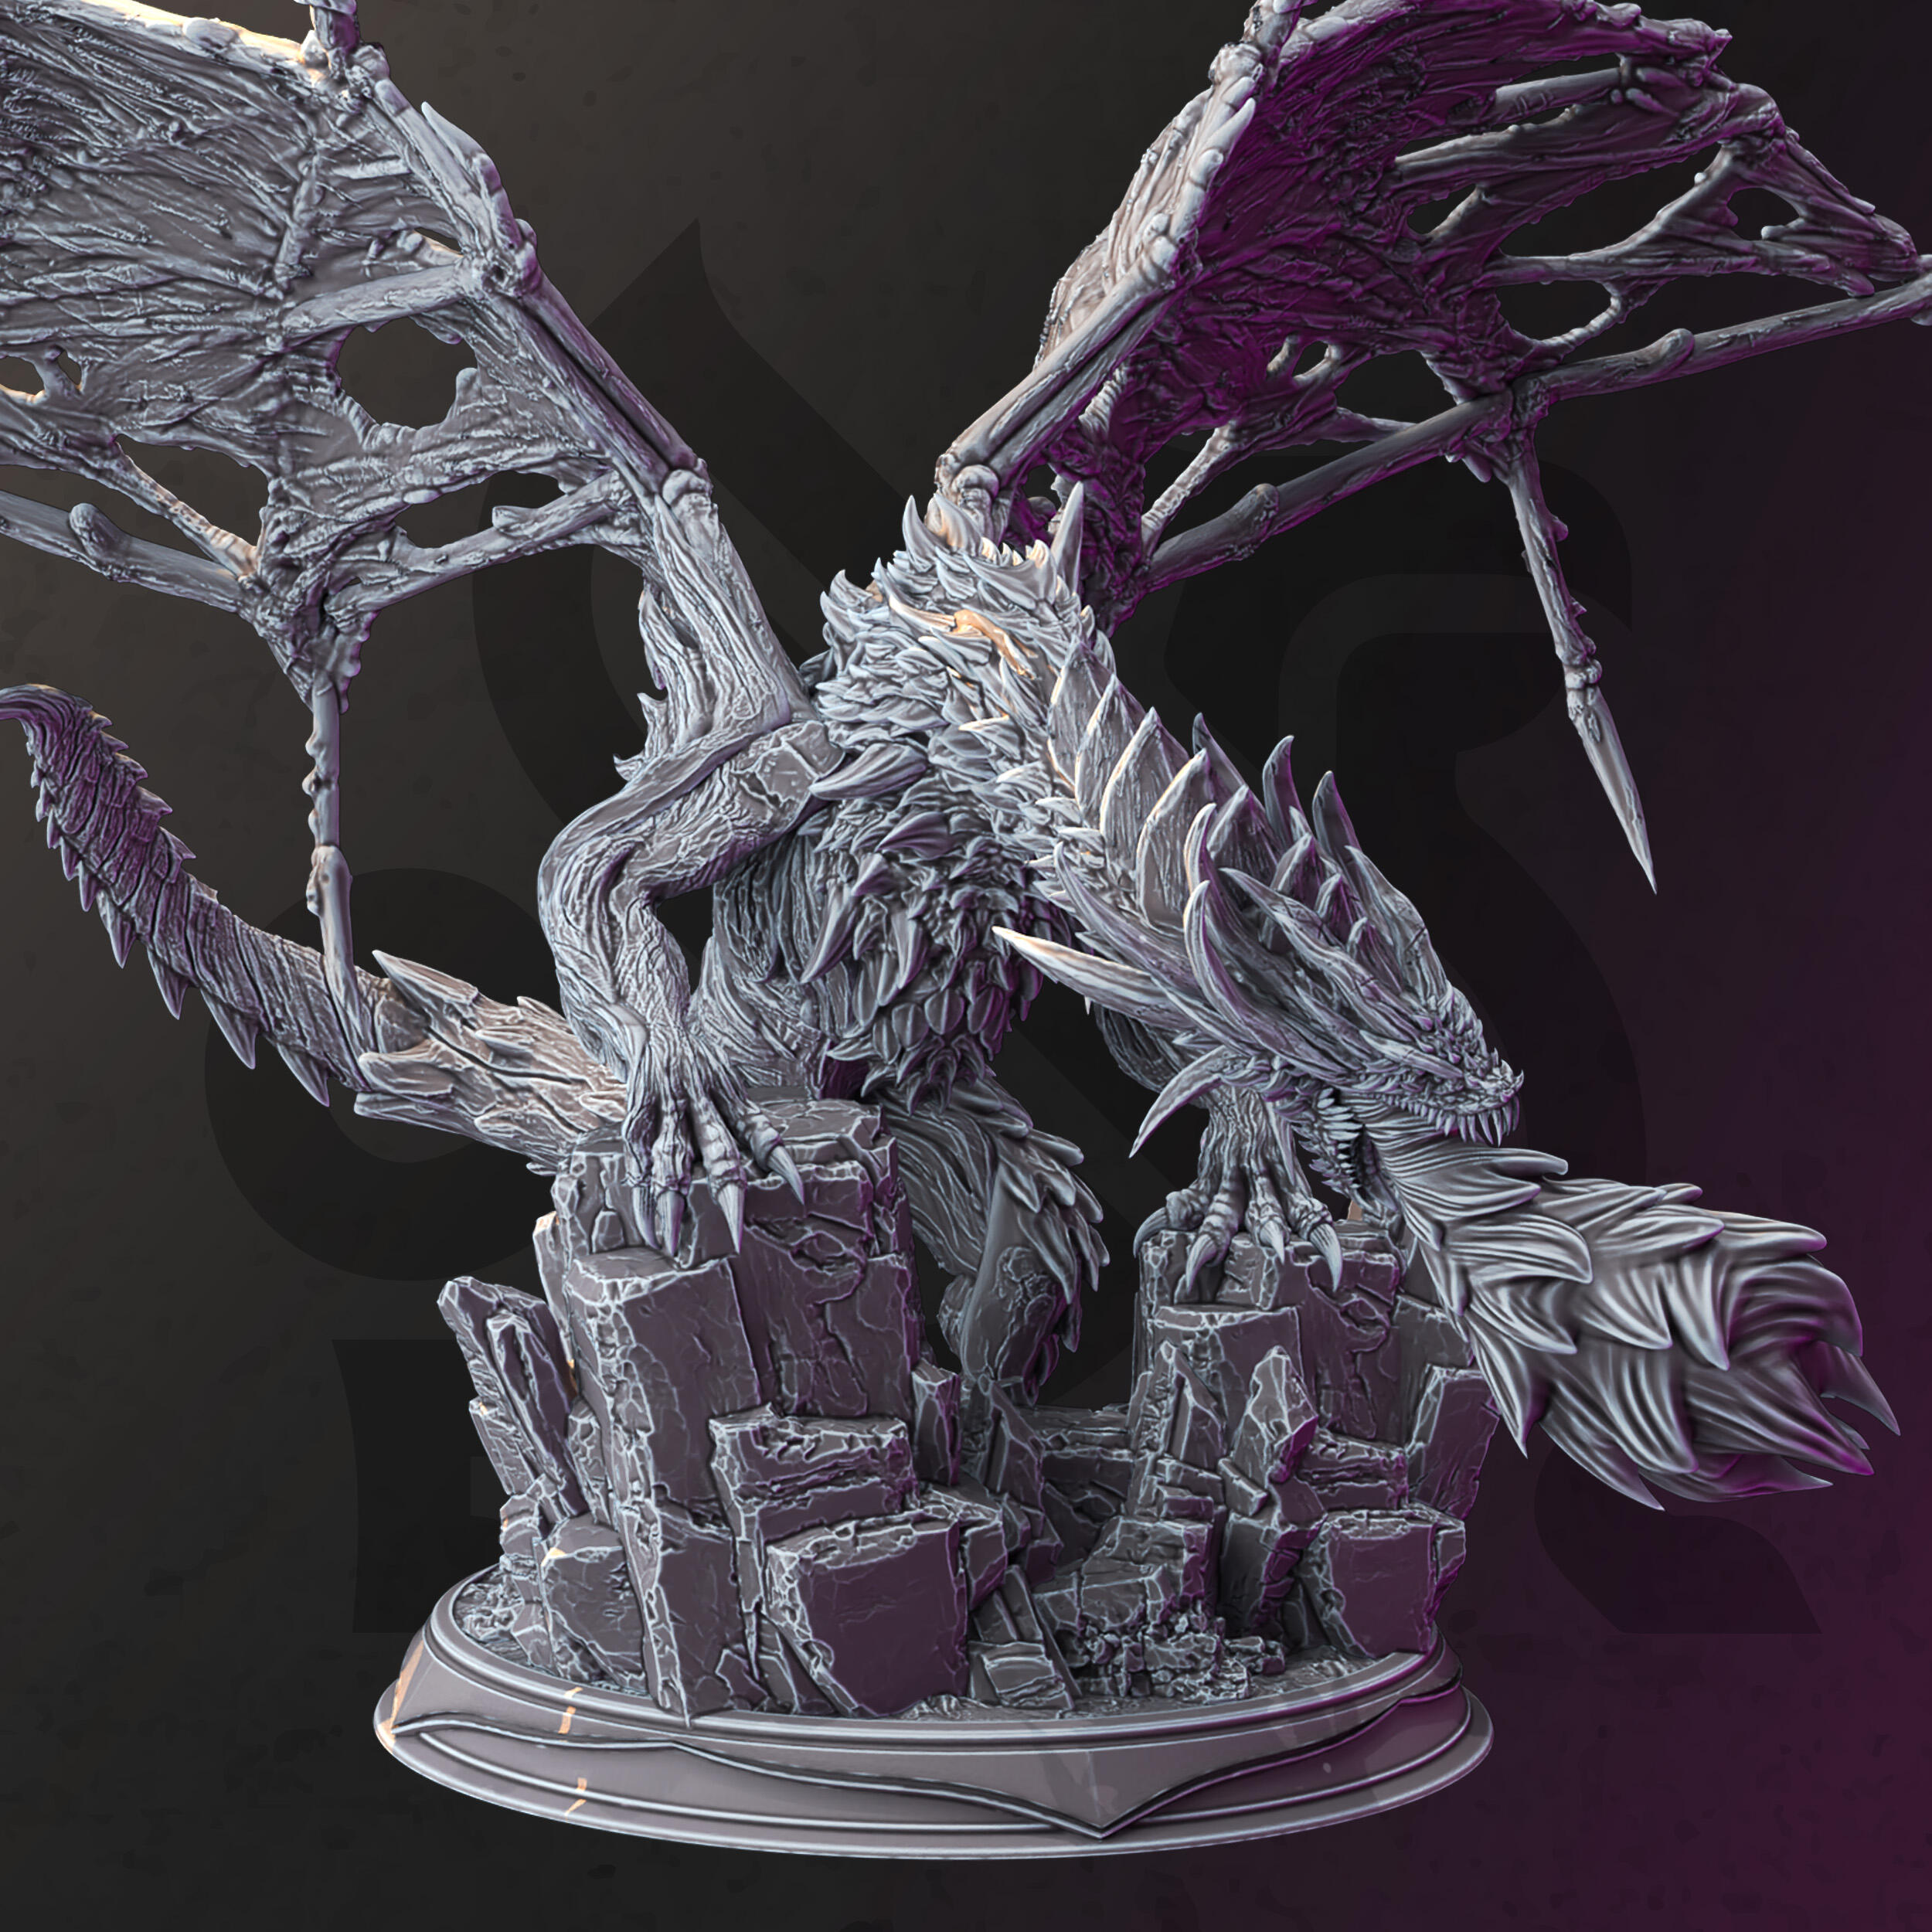 Undead Frost Dragon - Nerevin